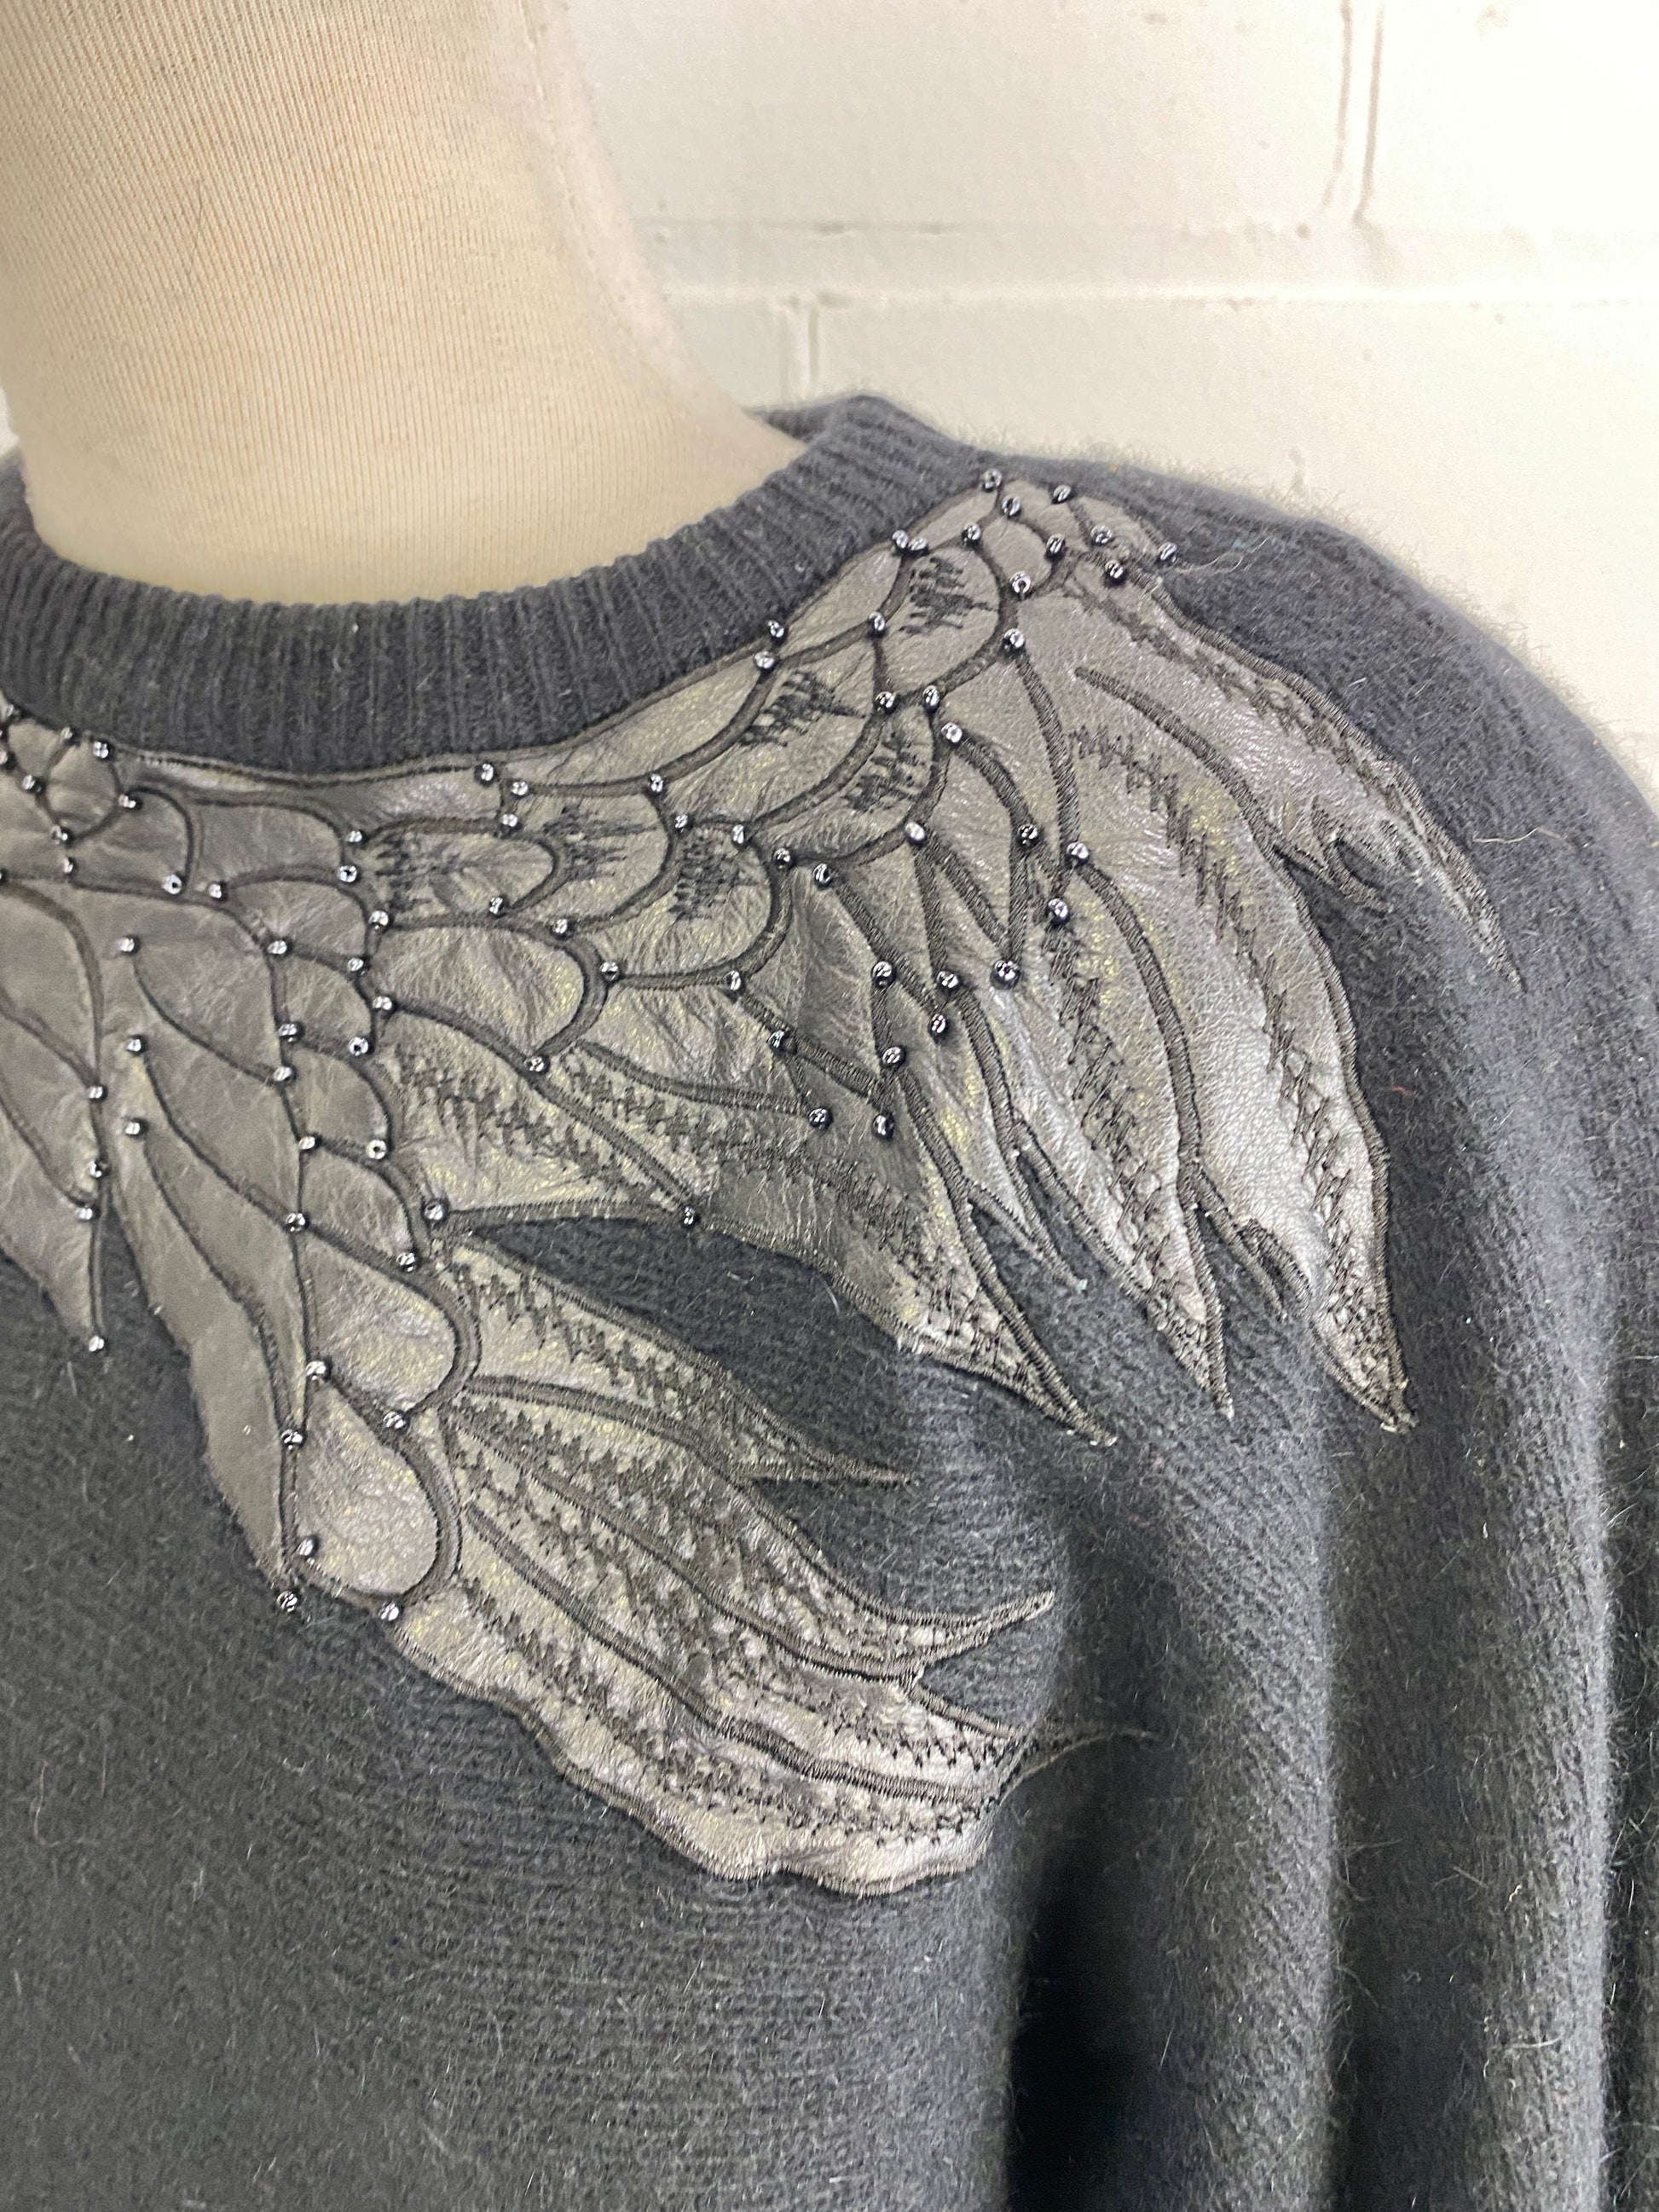 Vintage 1980s Black Wool/ Angora Sweater with Leather Appliqué Bird, Large